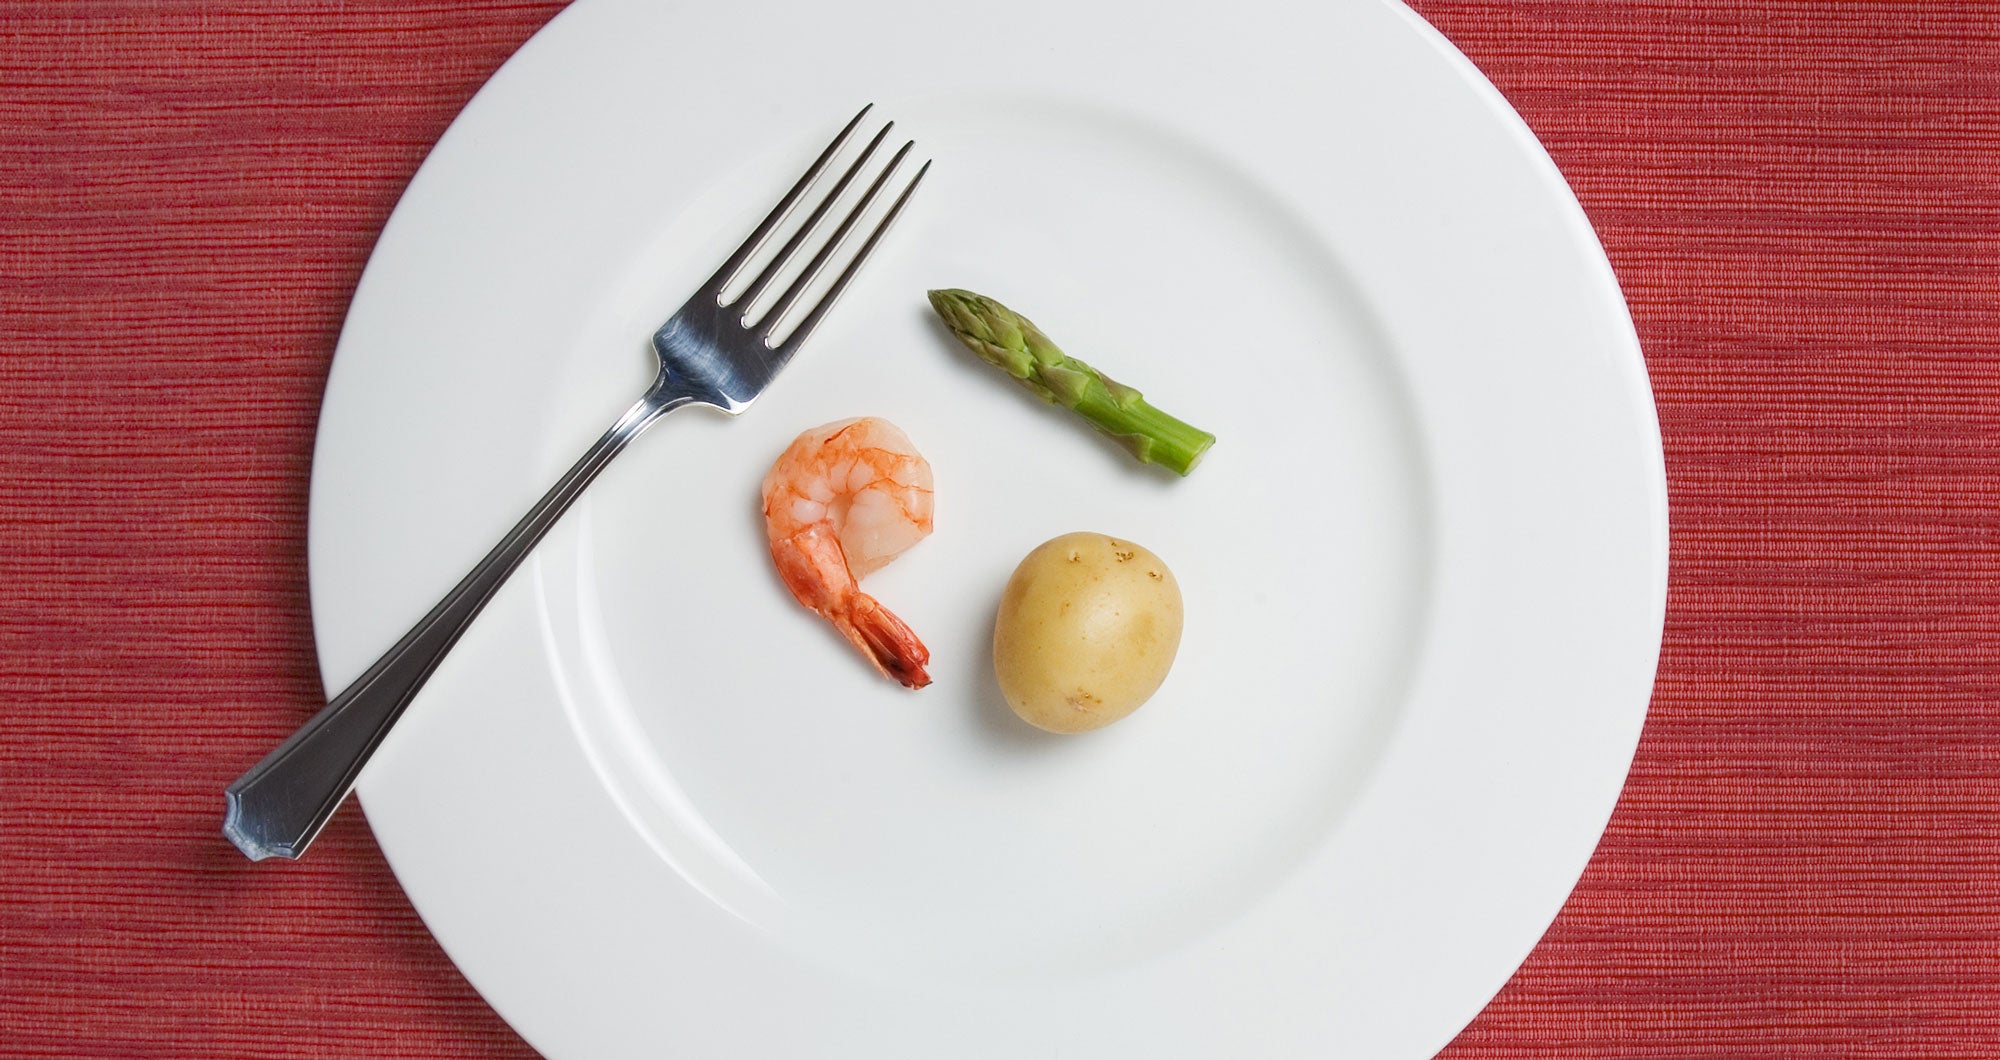 Want Long-Lasting Results? Stop Dieting!